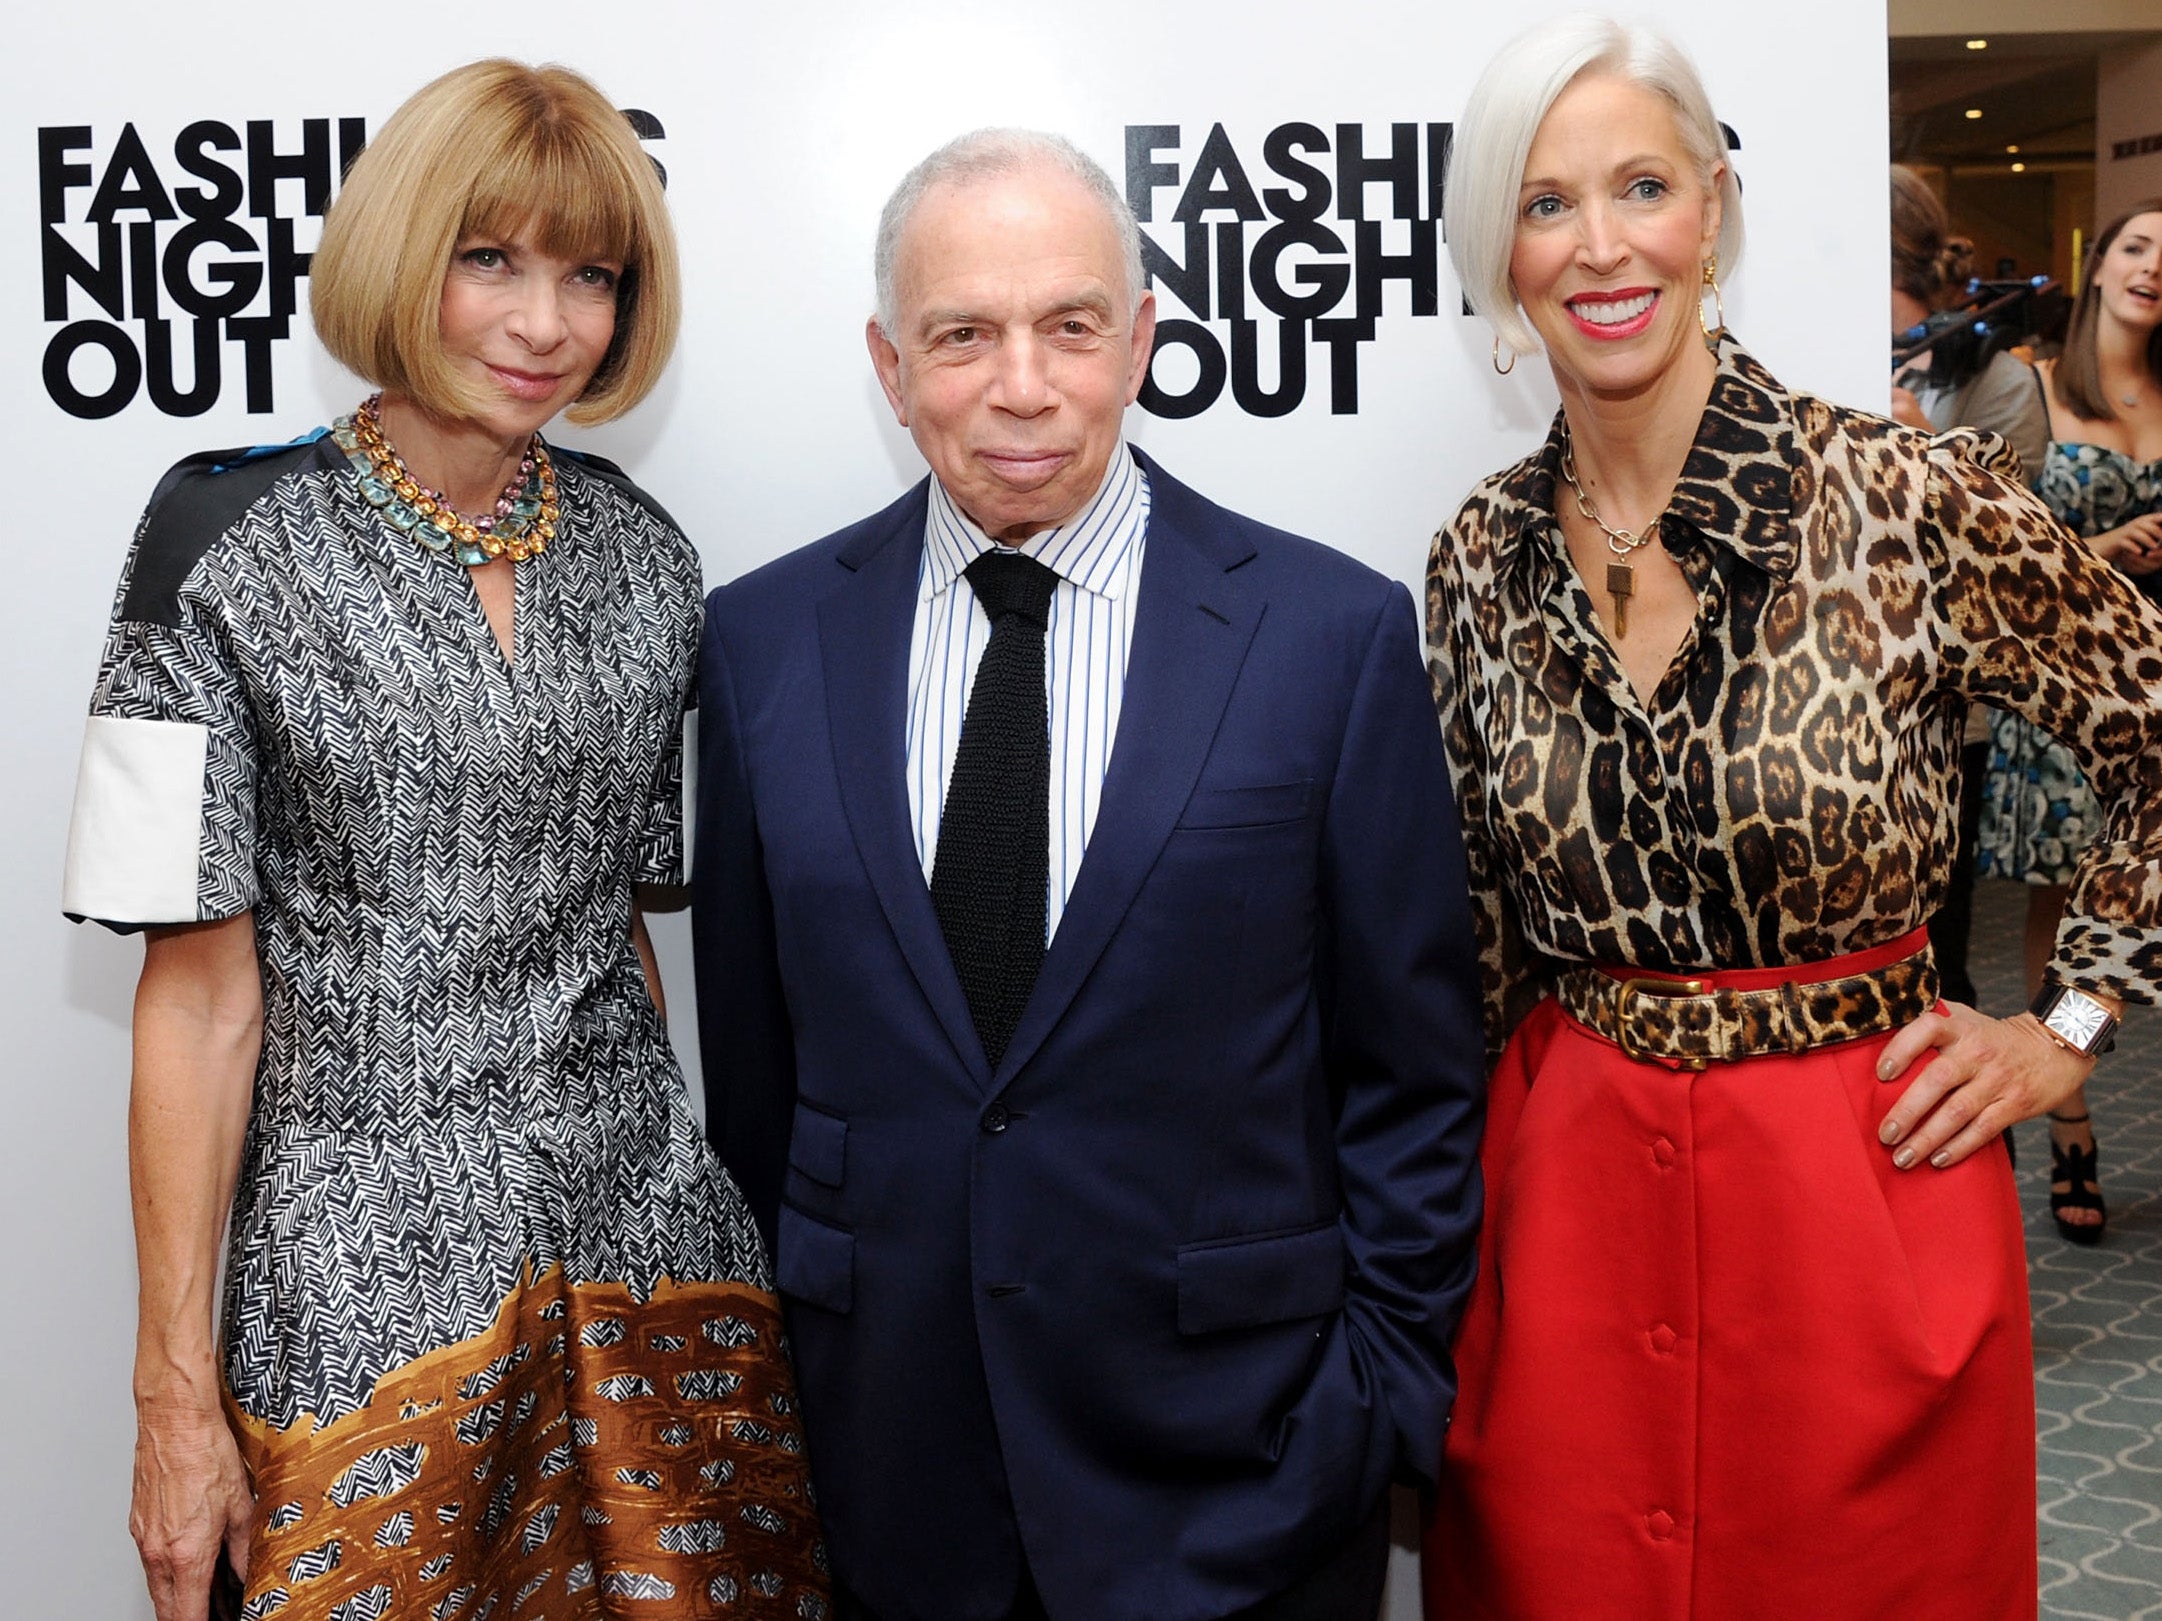 Anna Wintour, Si Newhouse and Linda Fargo attend the Bergdorf Goodman celebration during Fashion's Night Out in 2011 (Getty )